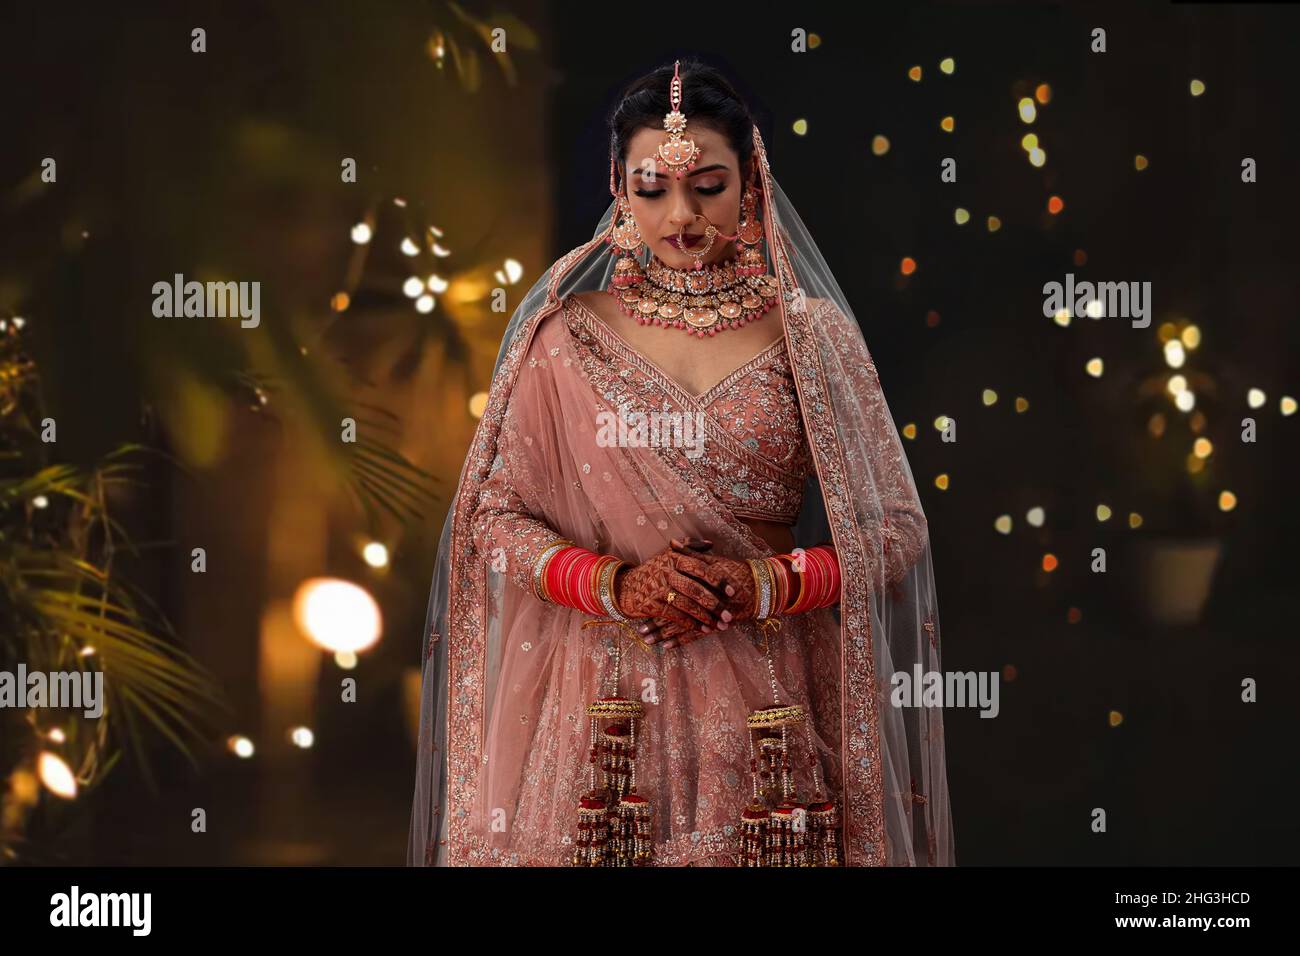 Indian woman in traditional wedding outfit standing in front of camera Stock Photo